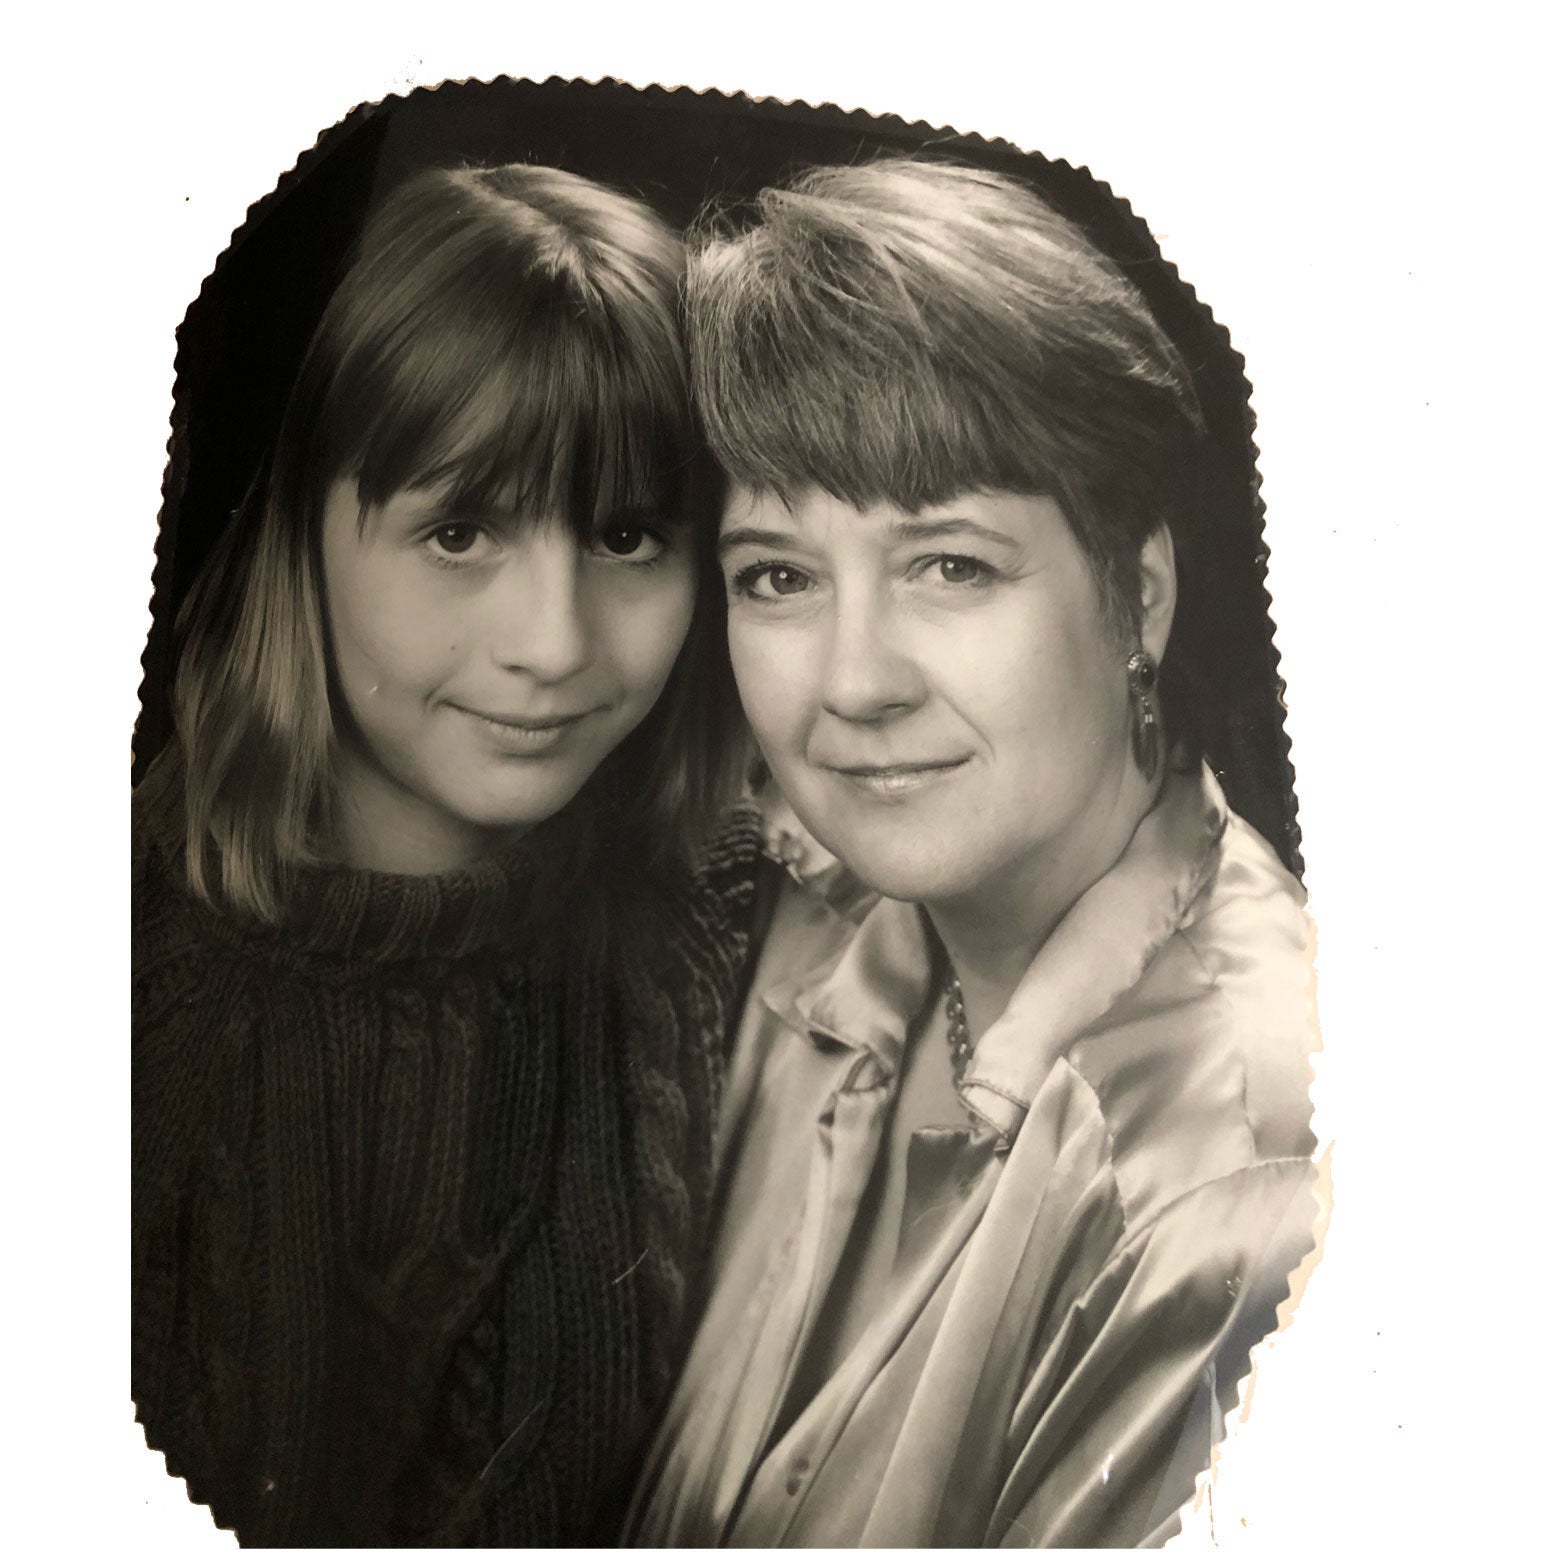 Eve Crawford Peyton as a child, with her mother.